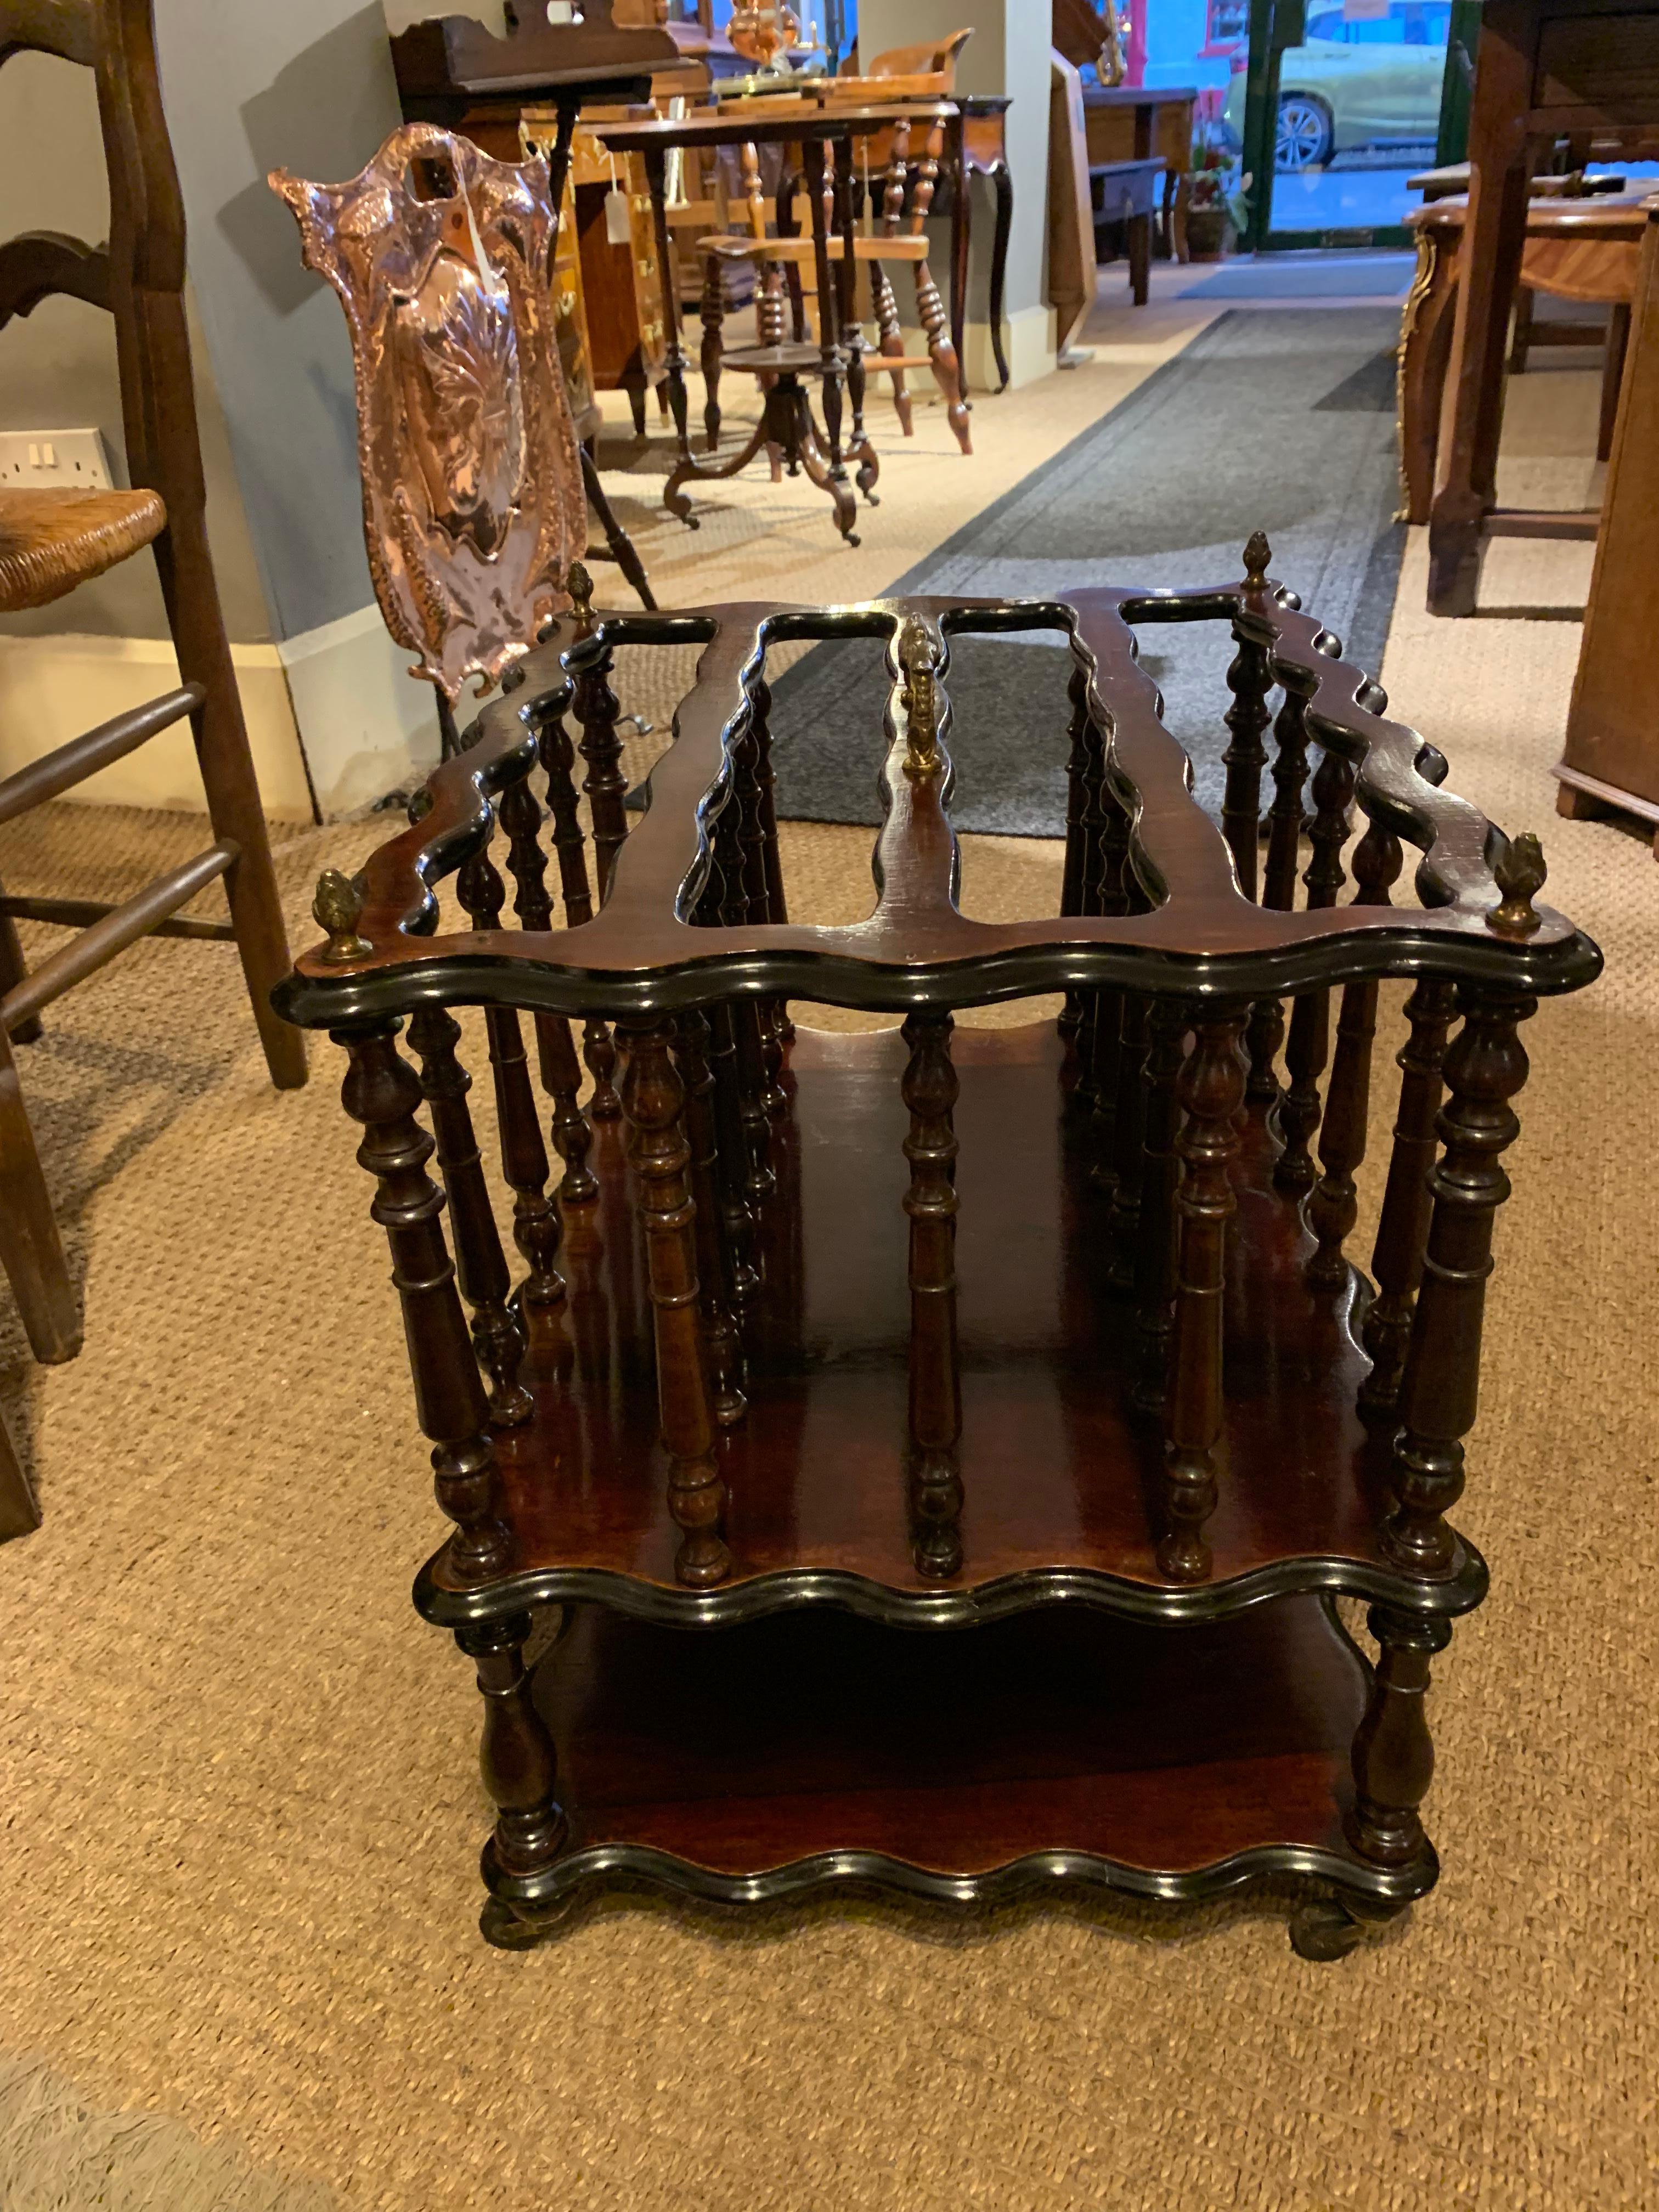 19th century Canterbury, original ormolu mounts and castors 

Great magazine rack, dating to circa 1870s , having been through our workshops and been cleaned and polished


Measures: Height 18 inches
Width 17 inches 
Depth 14.5 inches.